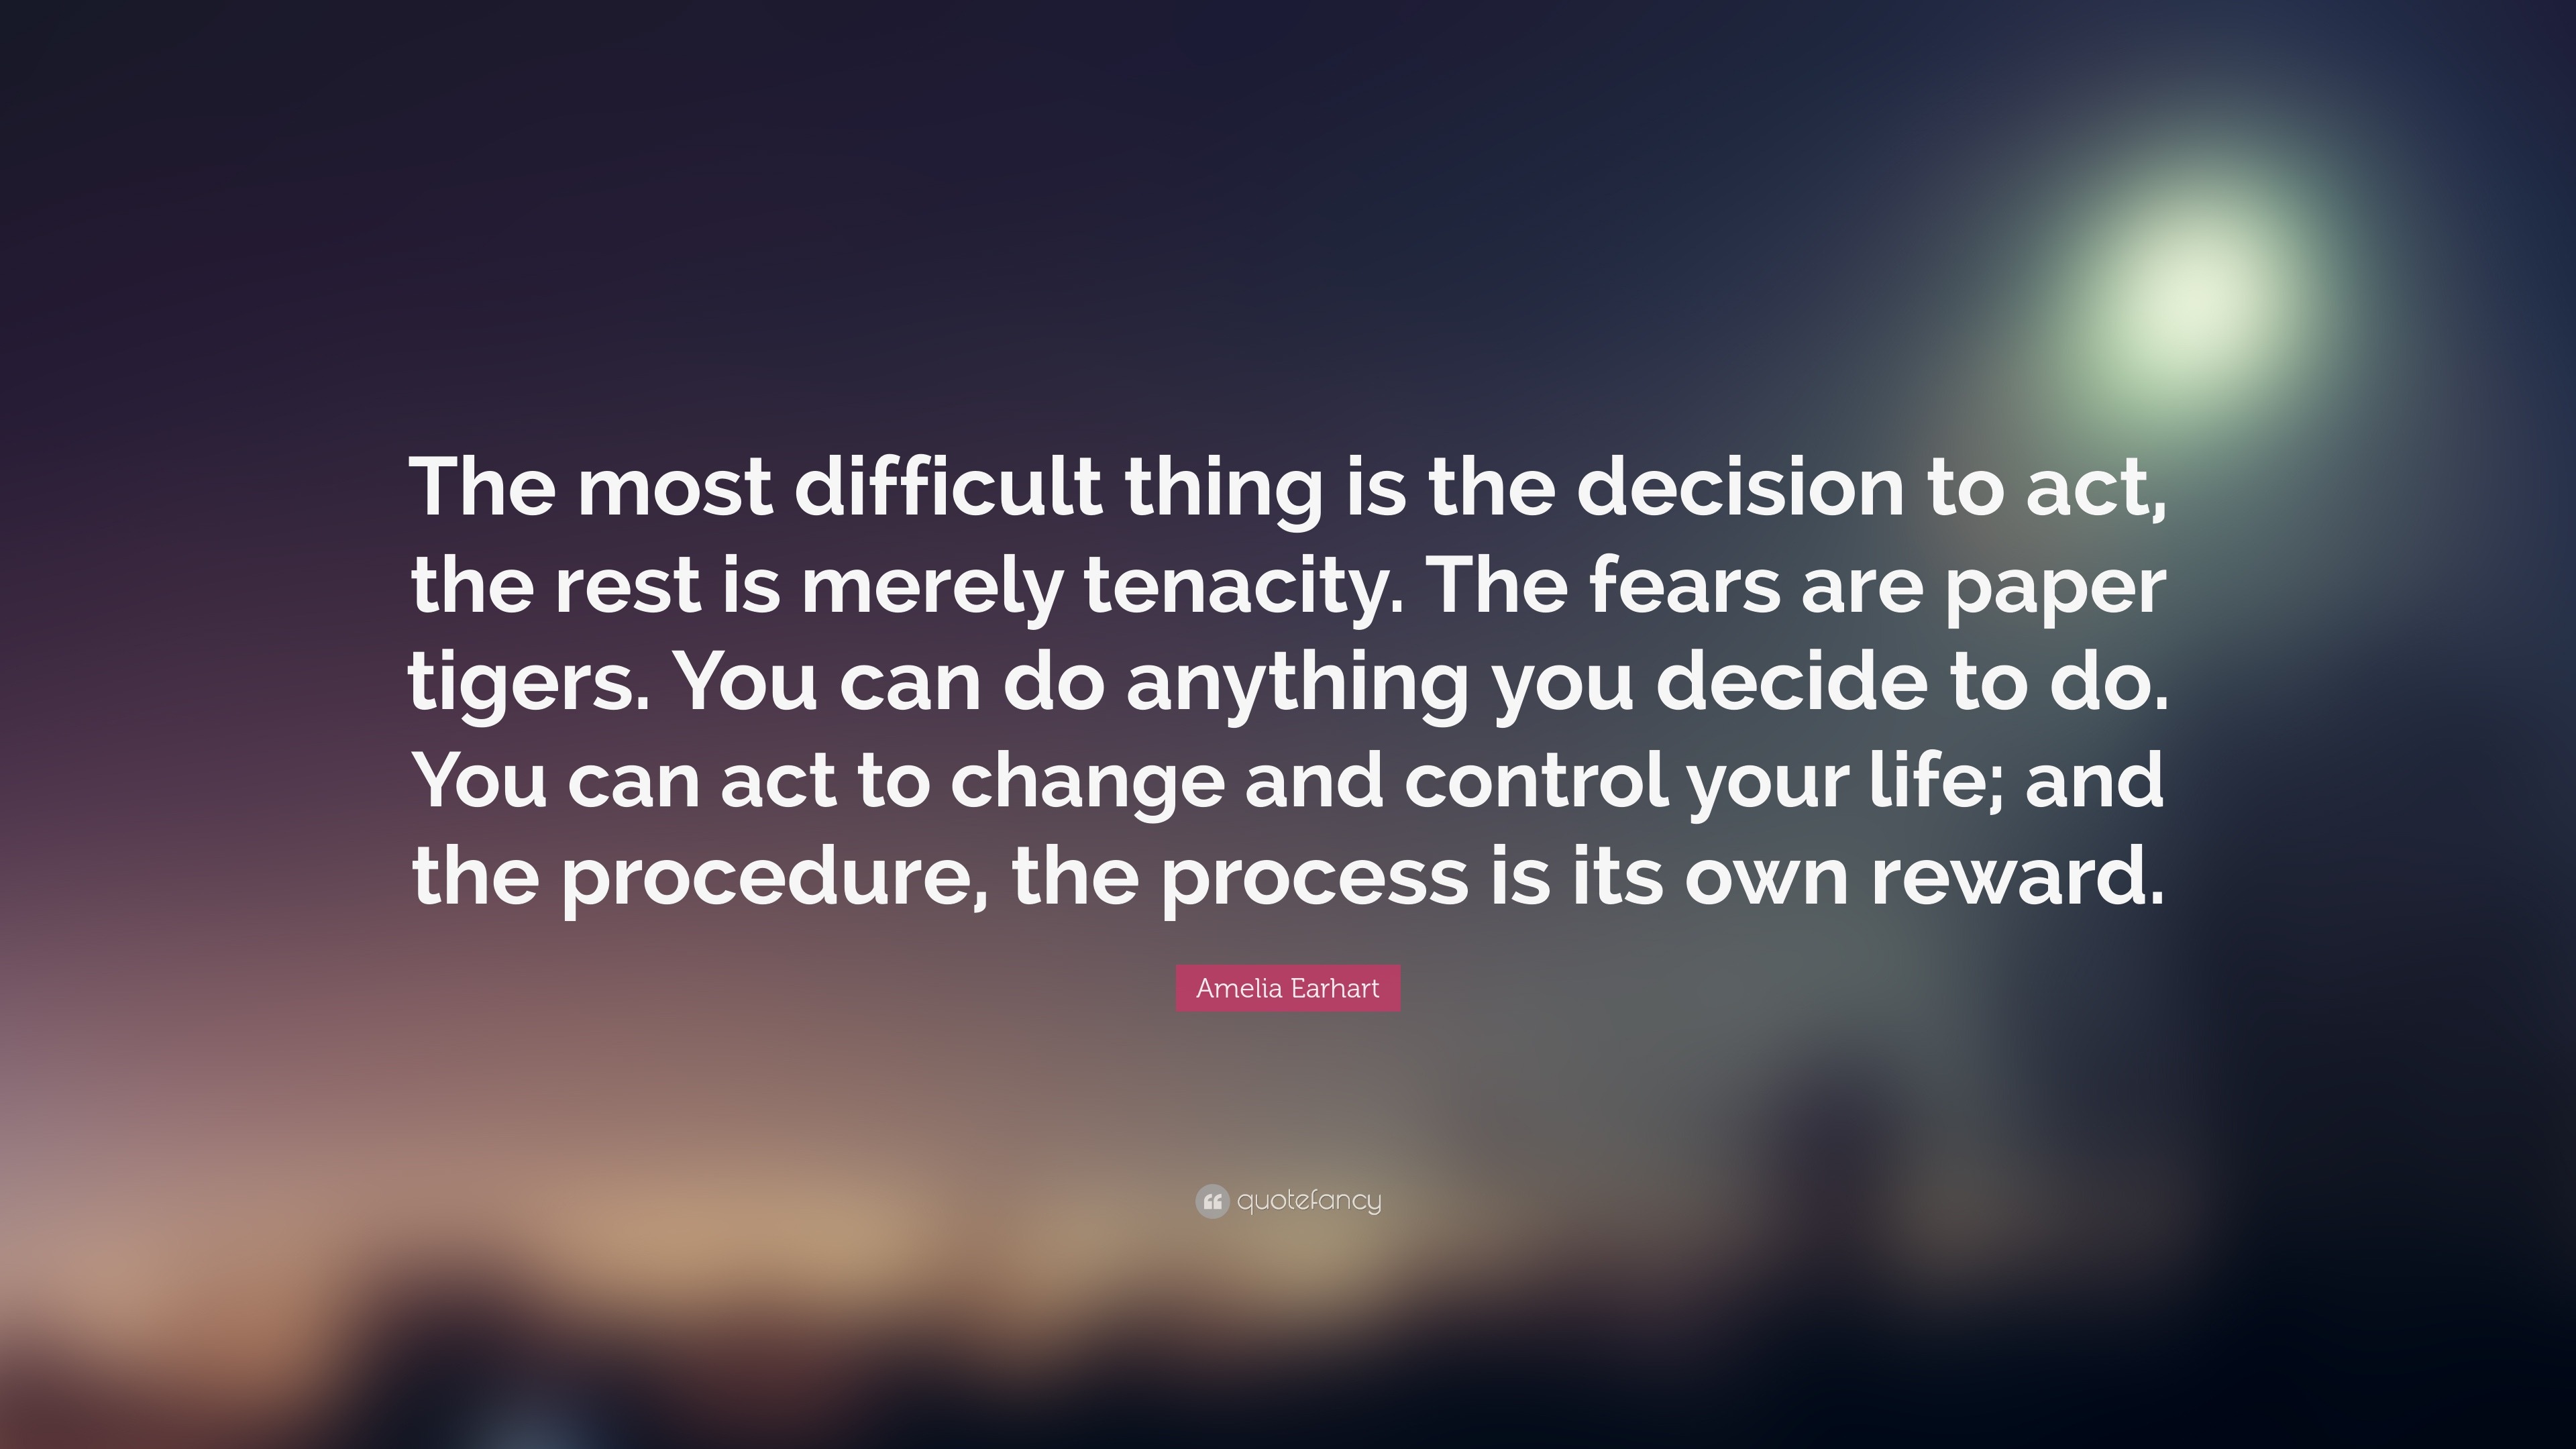 Decision Quotes “The most difficult thing is the decision to act the rest